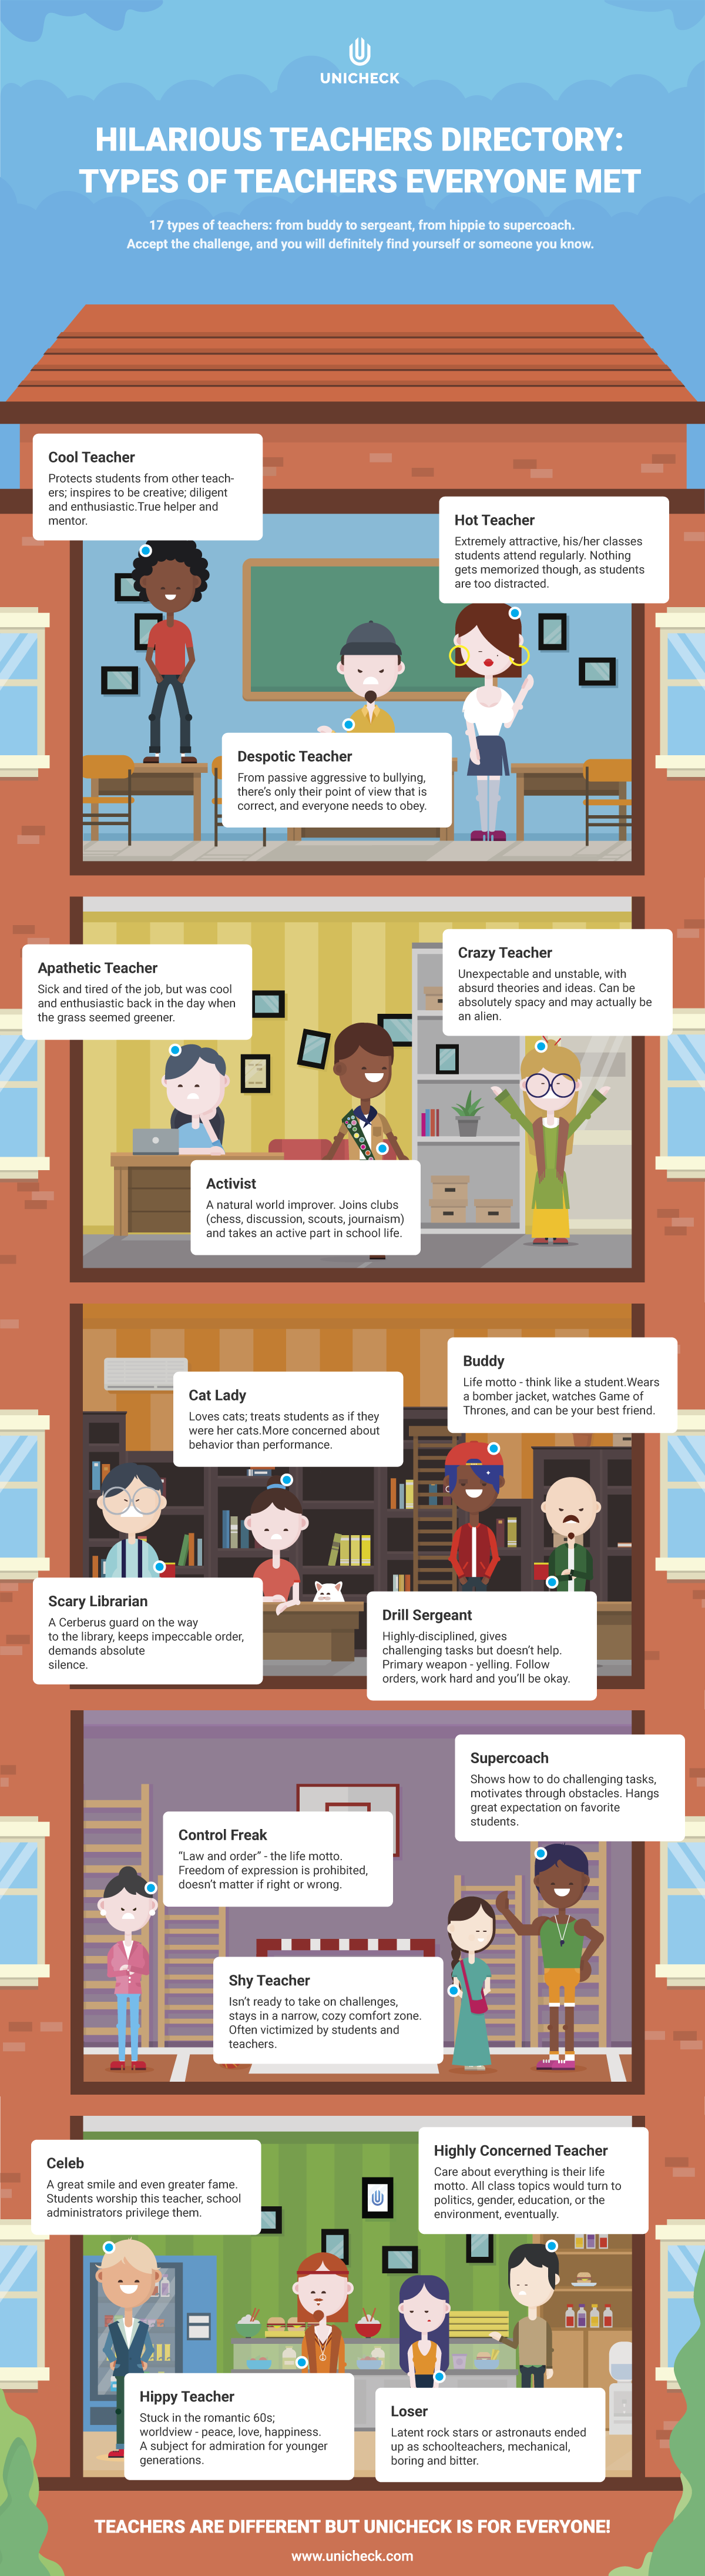 17 Types of Teachers Everyone Knows